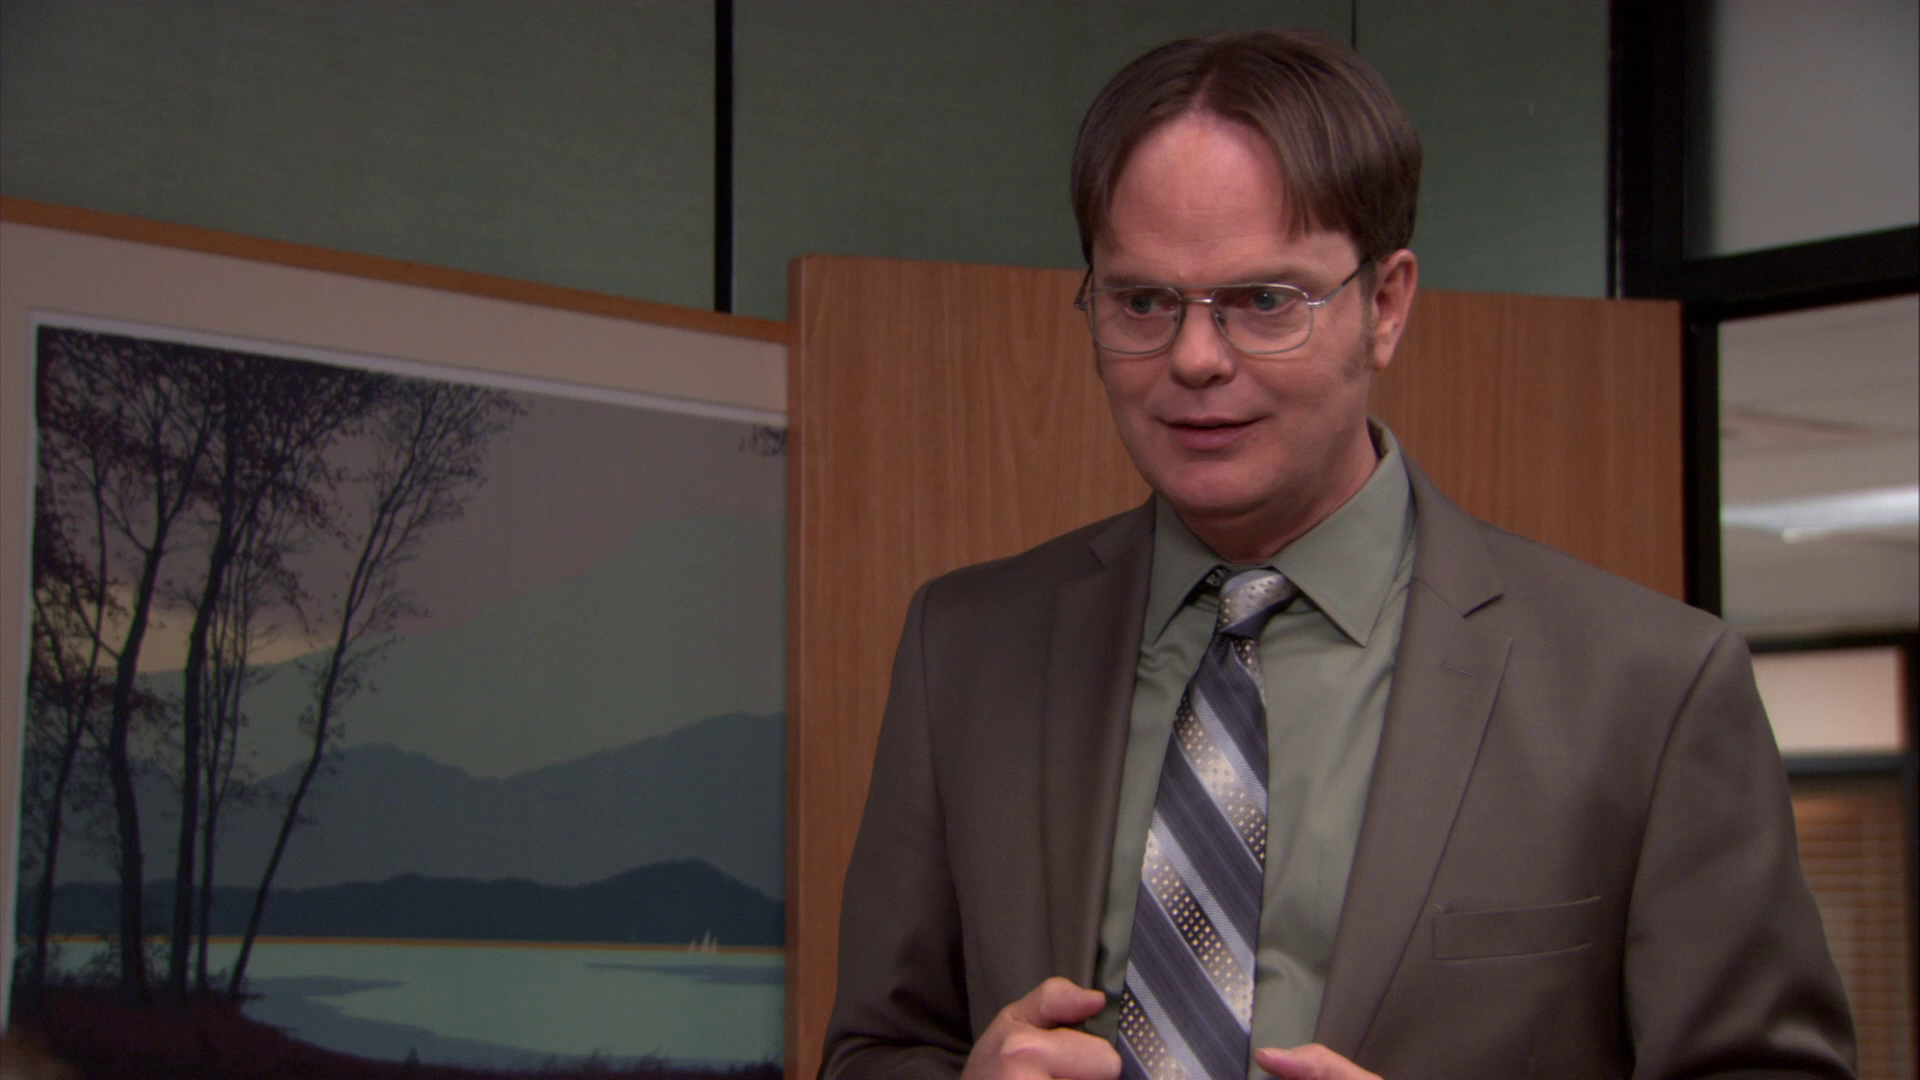 The office dwight spin-off